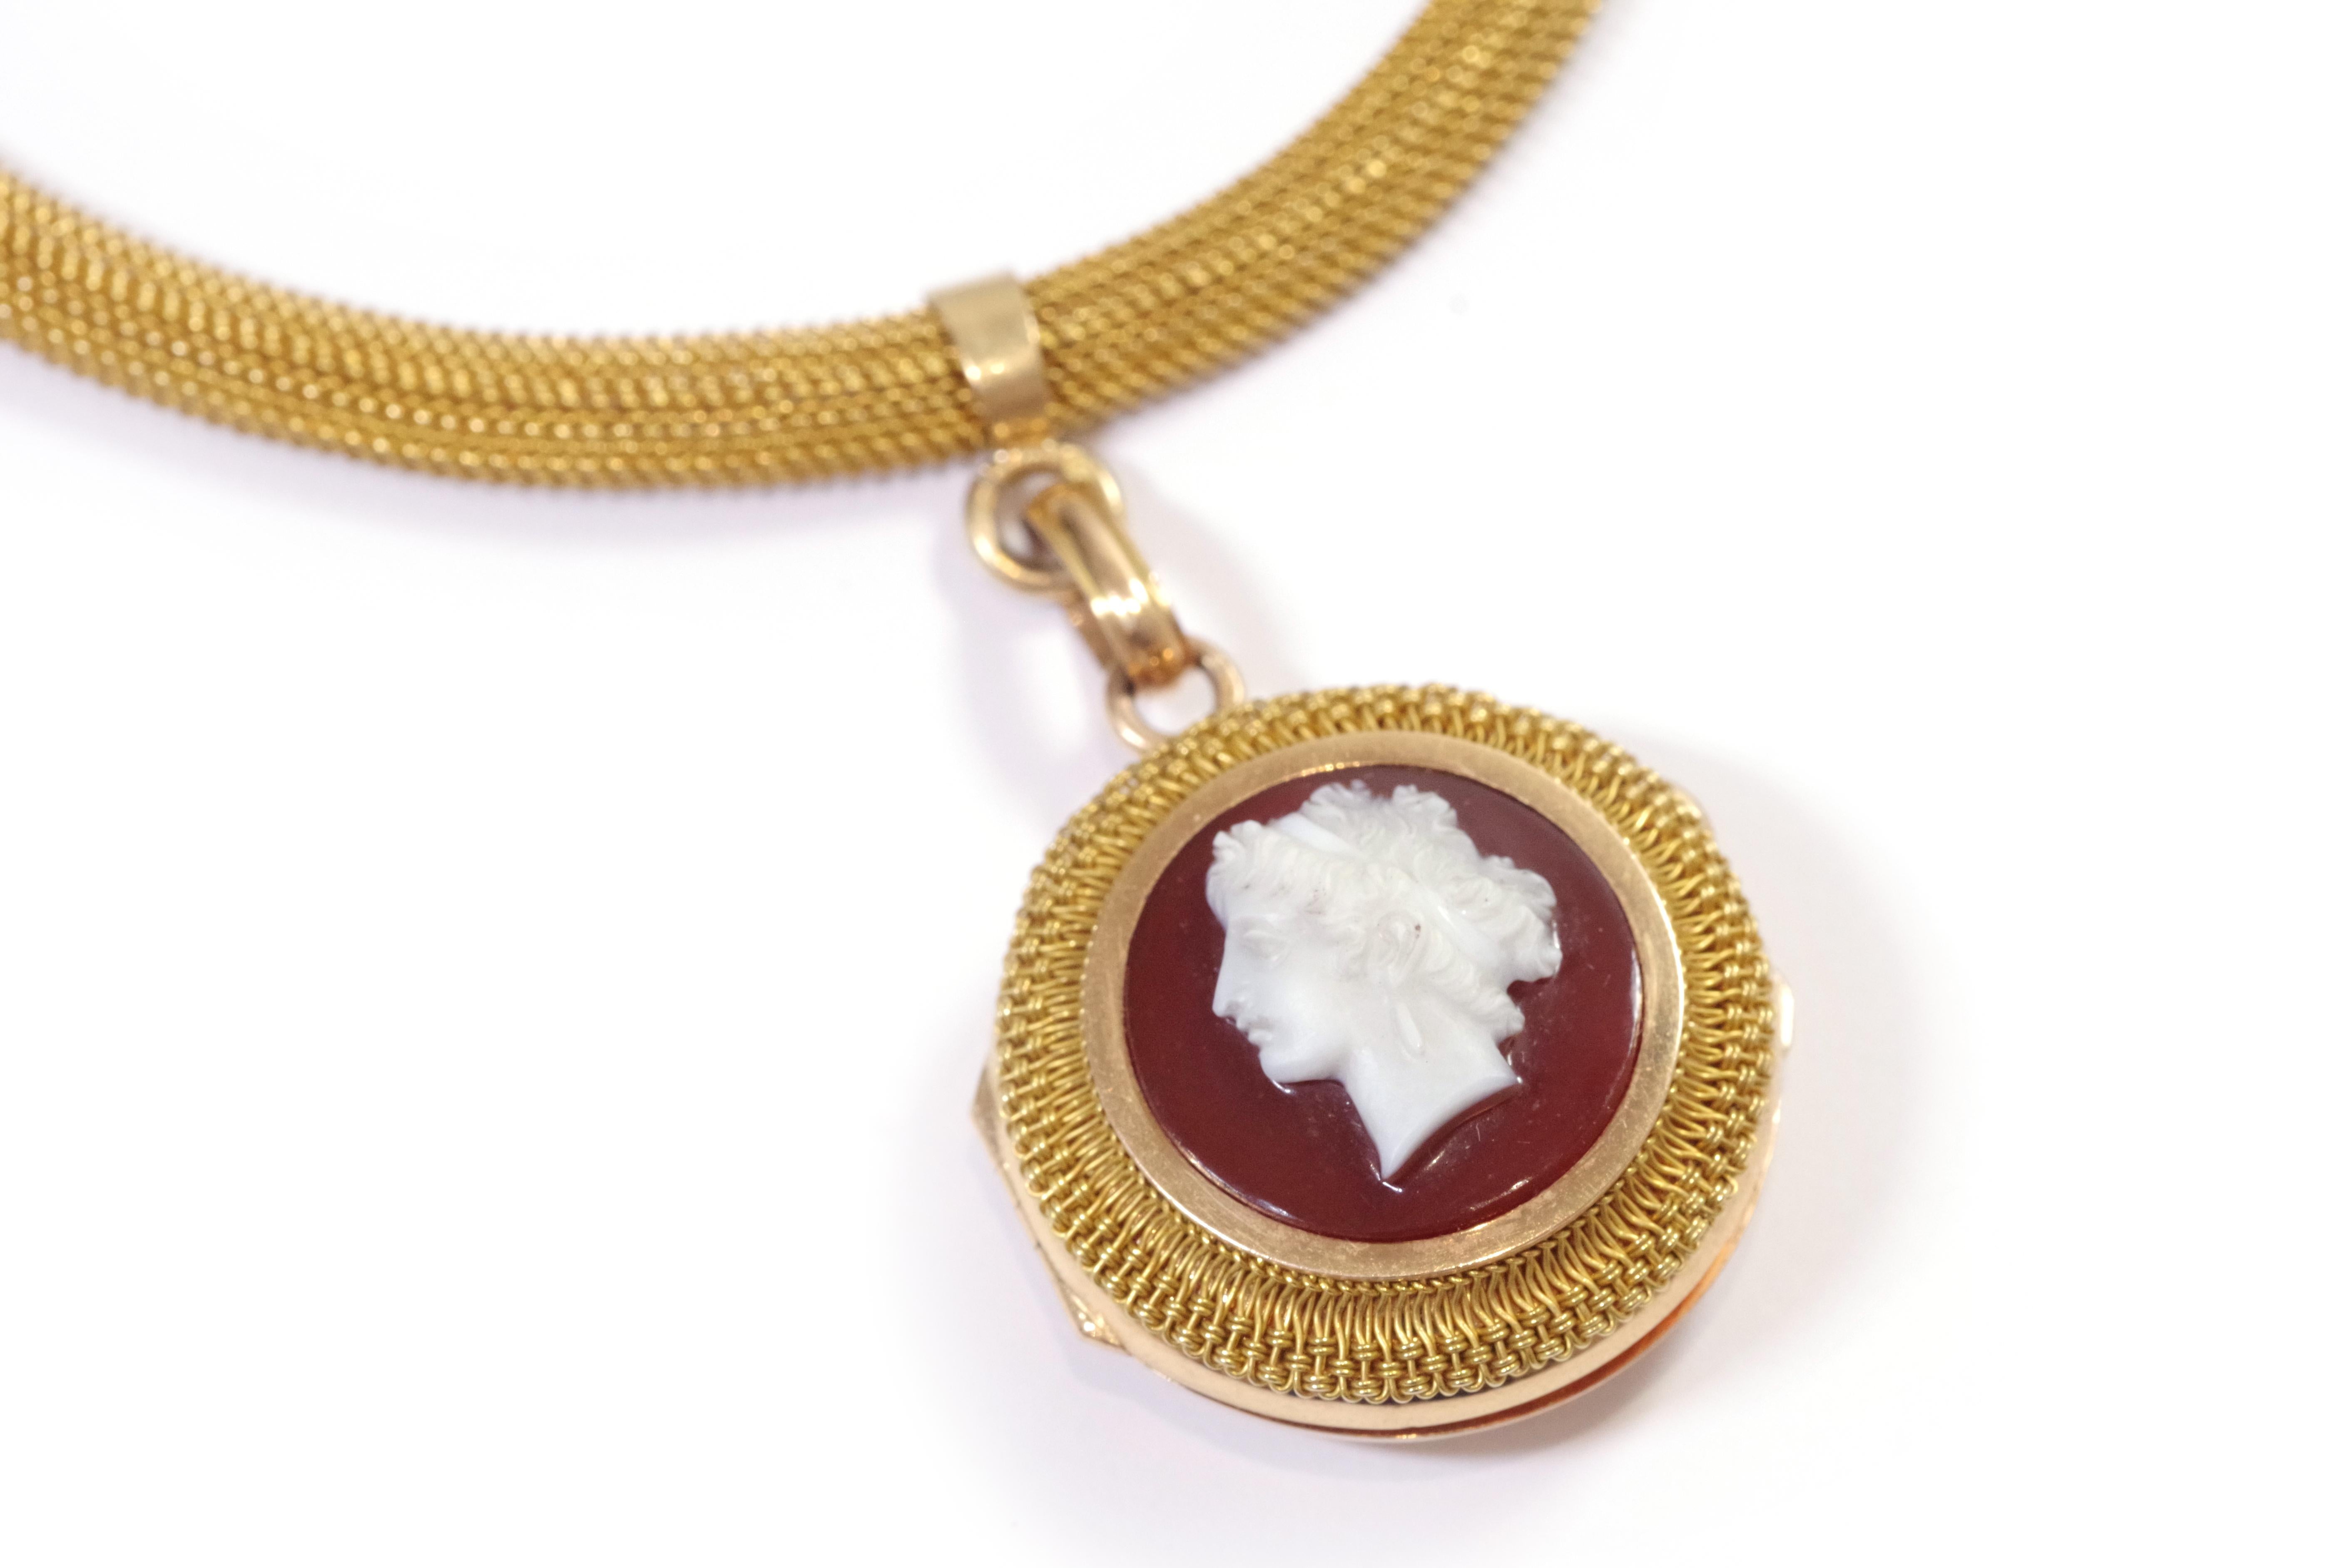 Women's Antique necklace cameo pendant in 18k gold, victorian agate cameo locket pendant For Sale